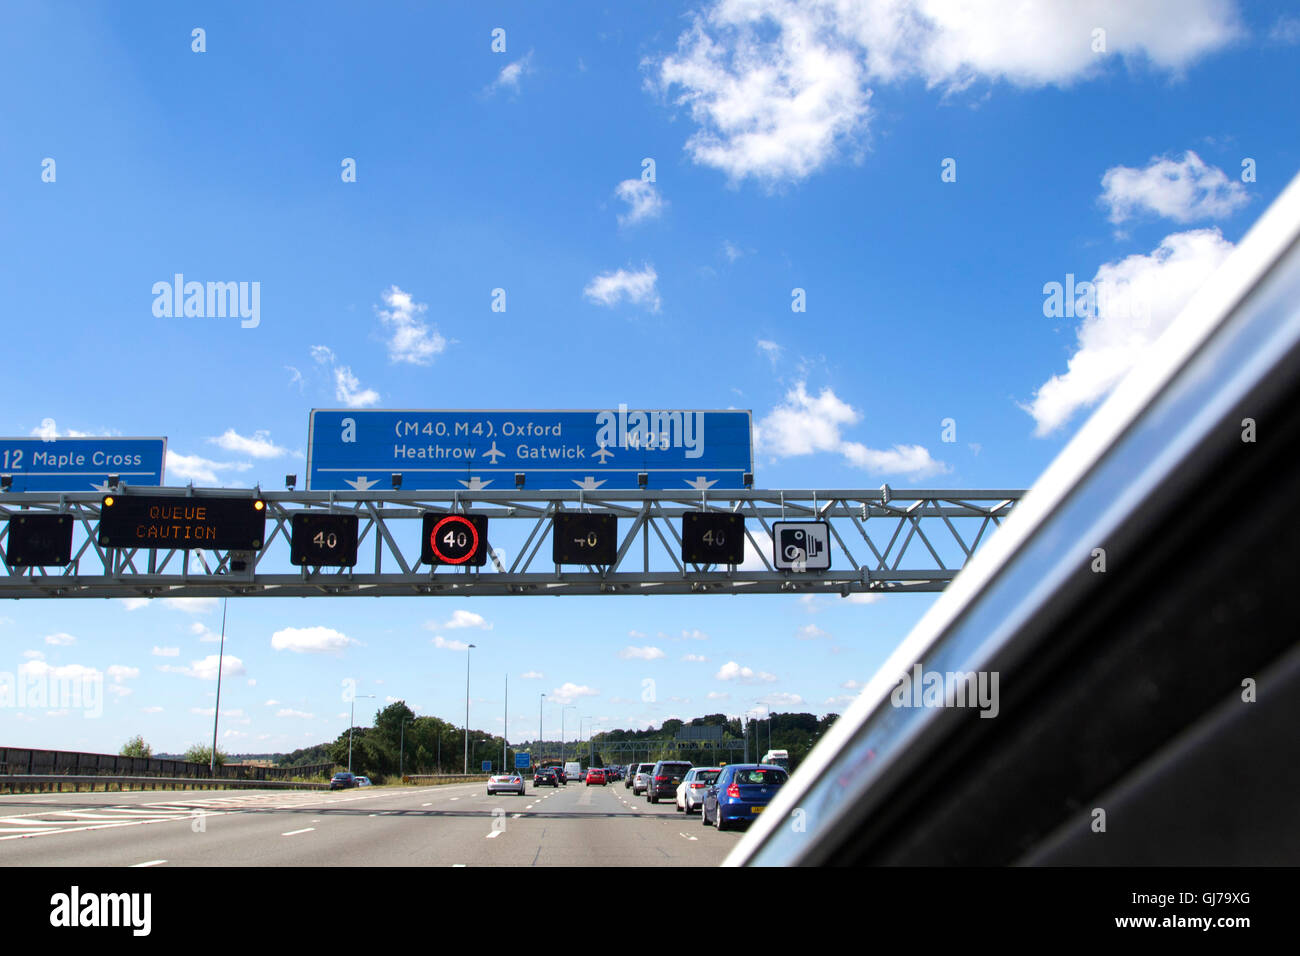 Heavy traffic on the M25 motorway anticlockwise looking south between junctions 15 and 16, near Heathrow Airport in England Stock Photo